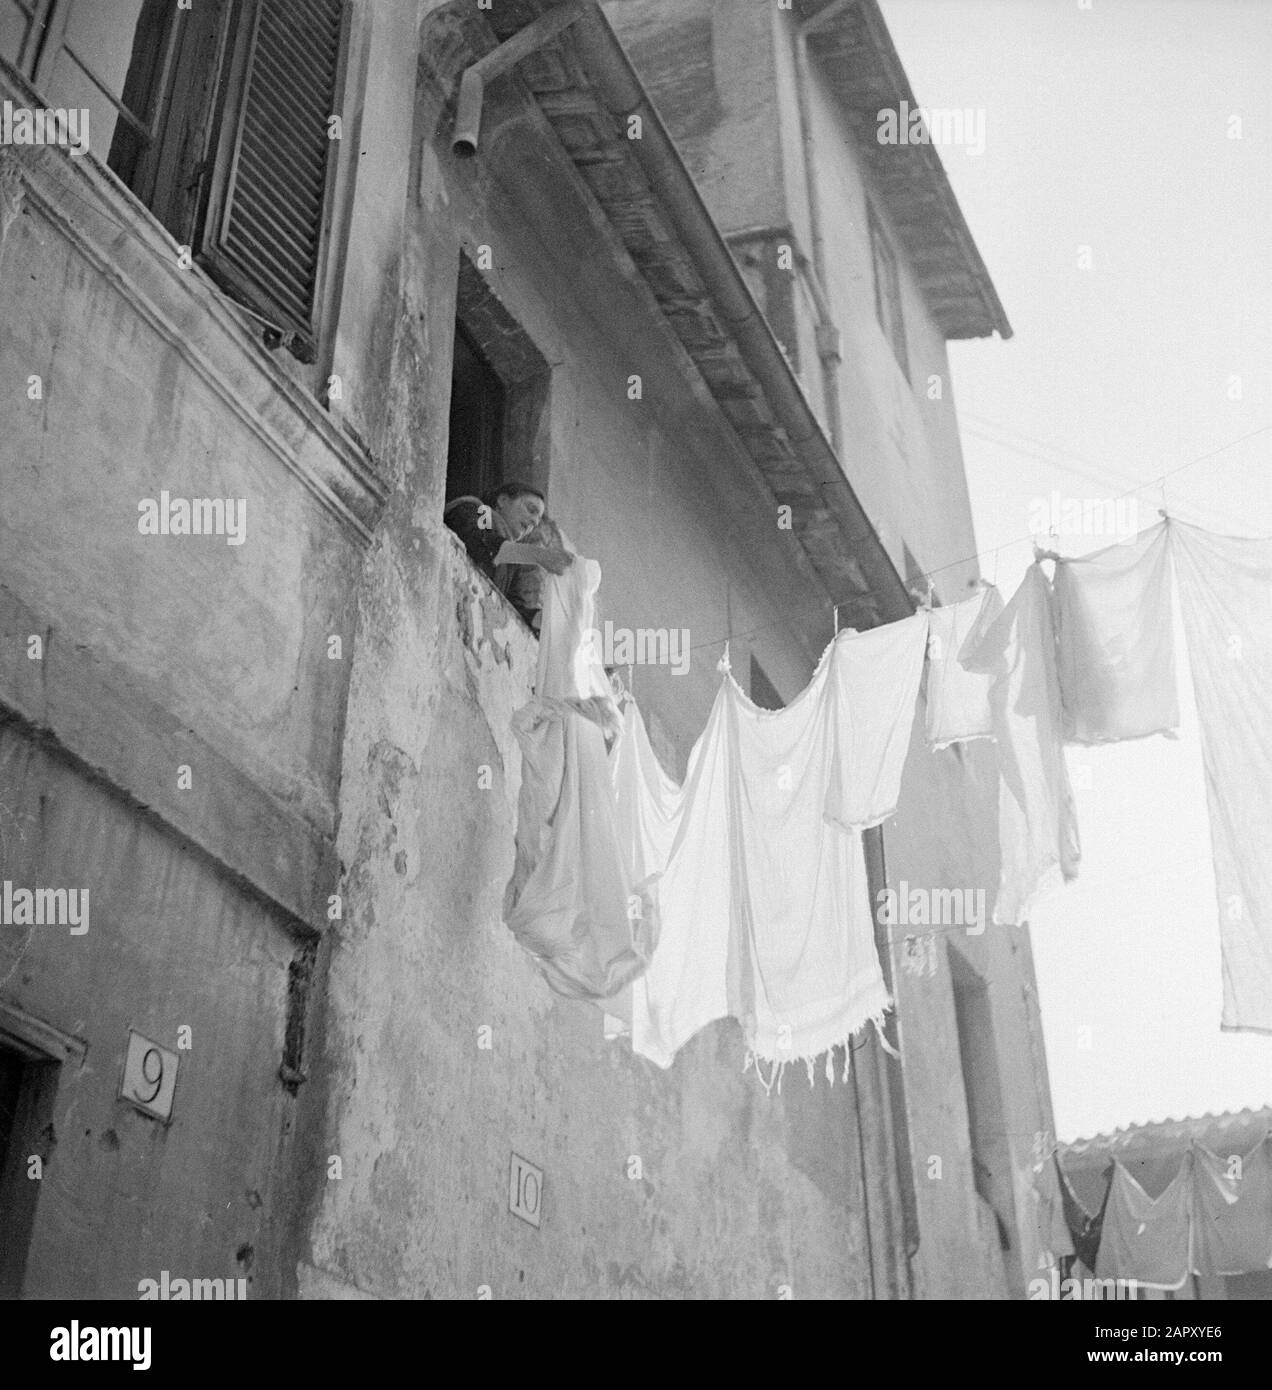 Rome: Visit to the city  Woman hangs laundry from a window on a line between houses above a small street in Trastevere Date: December 1937 Location: Italy, Rome Keywords: buildings, cityscape, street images, women, laundry, homes Stock Photo